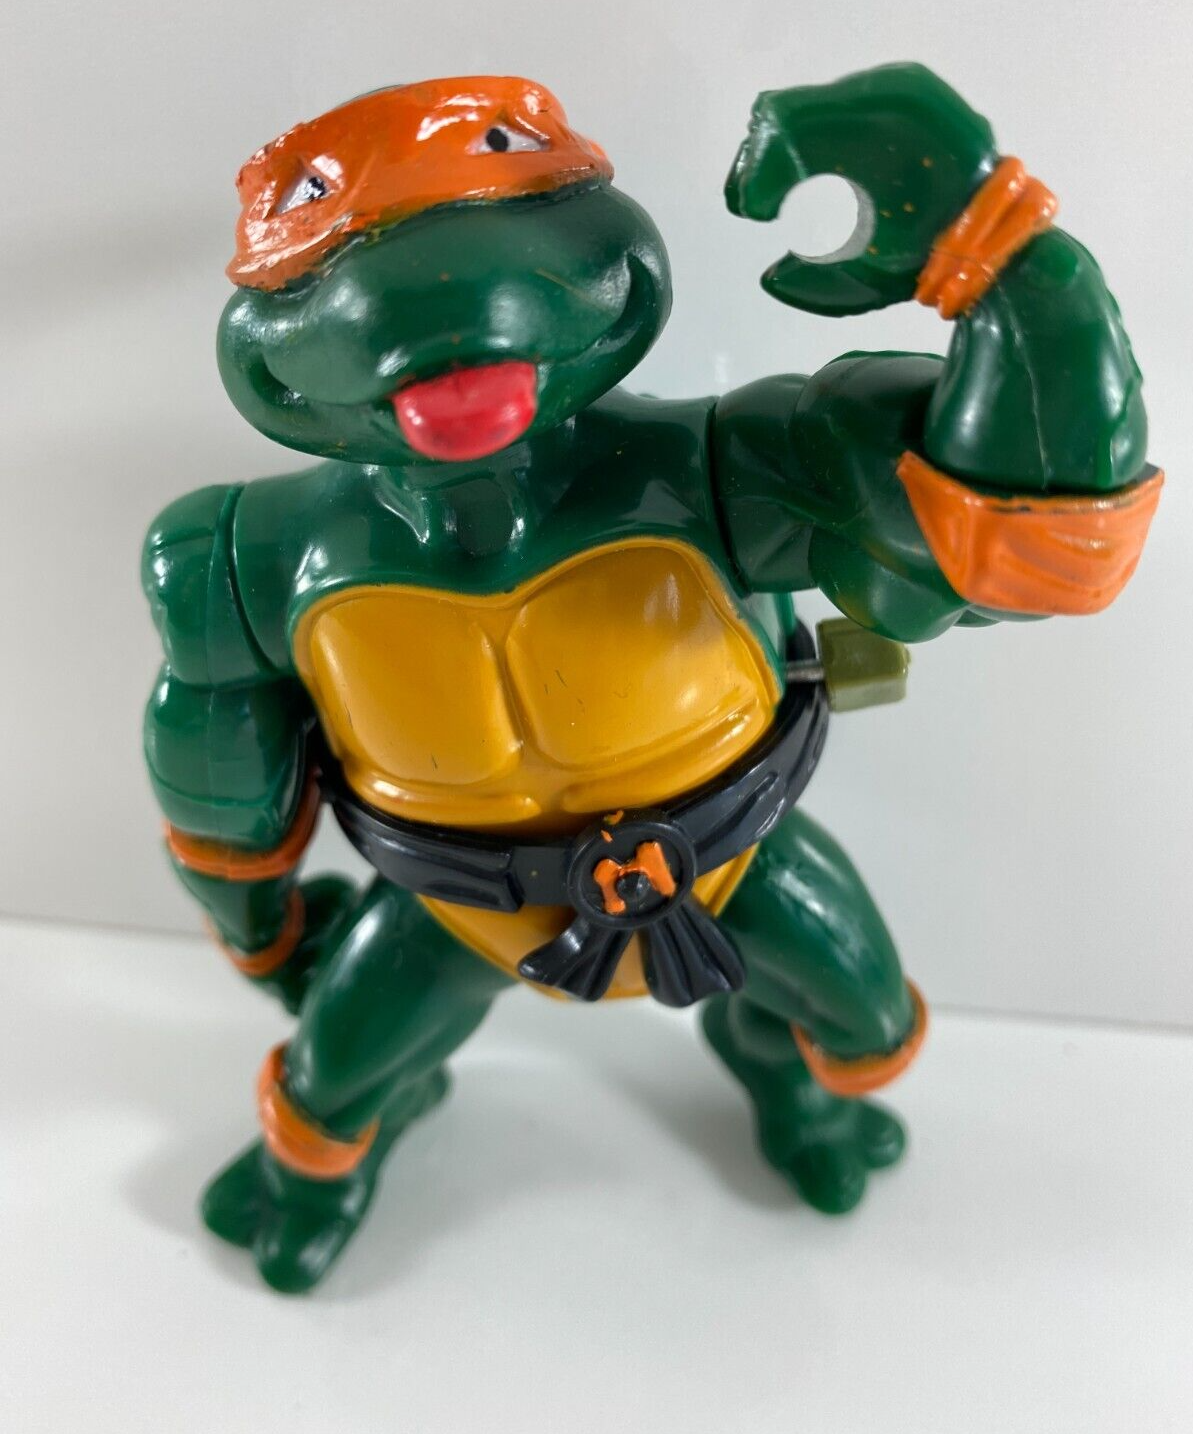 Primary image for Vintage 1989 Playmates TMNT Michelangelo Wind Up Toy Figurine